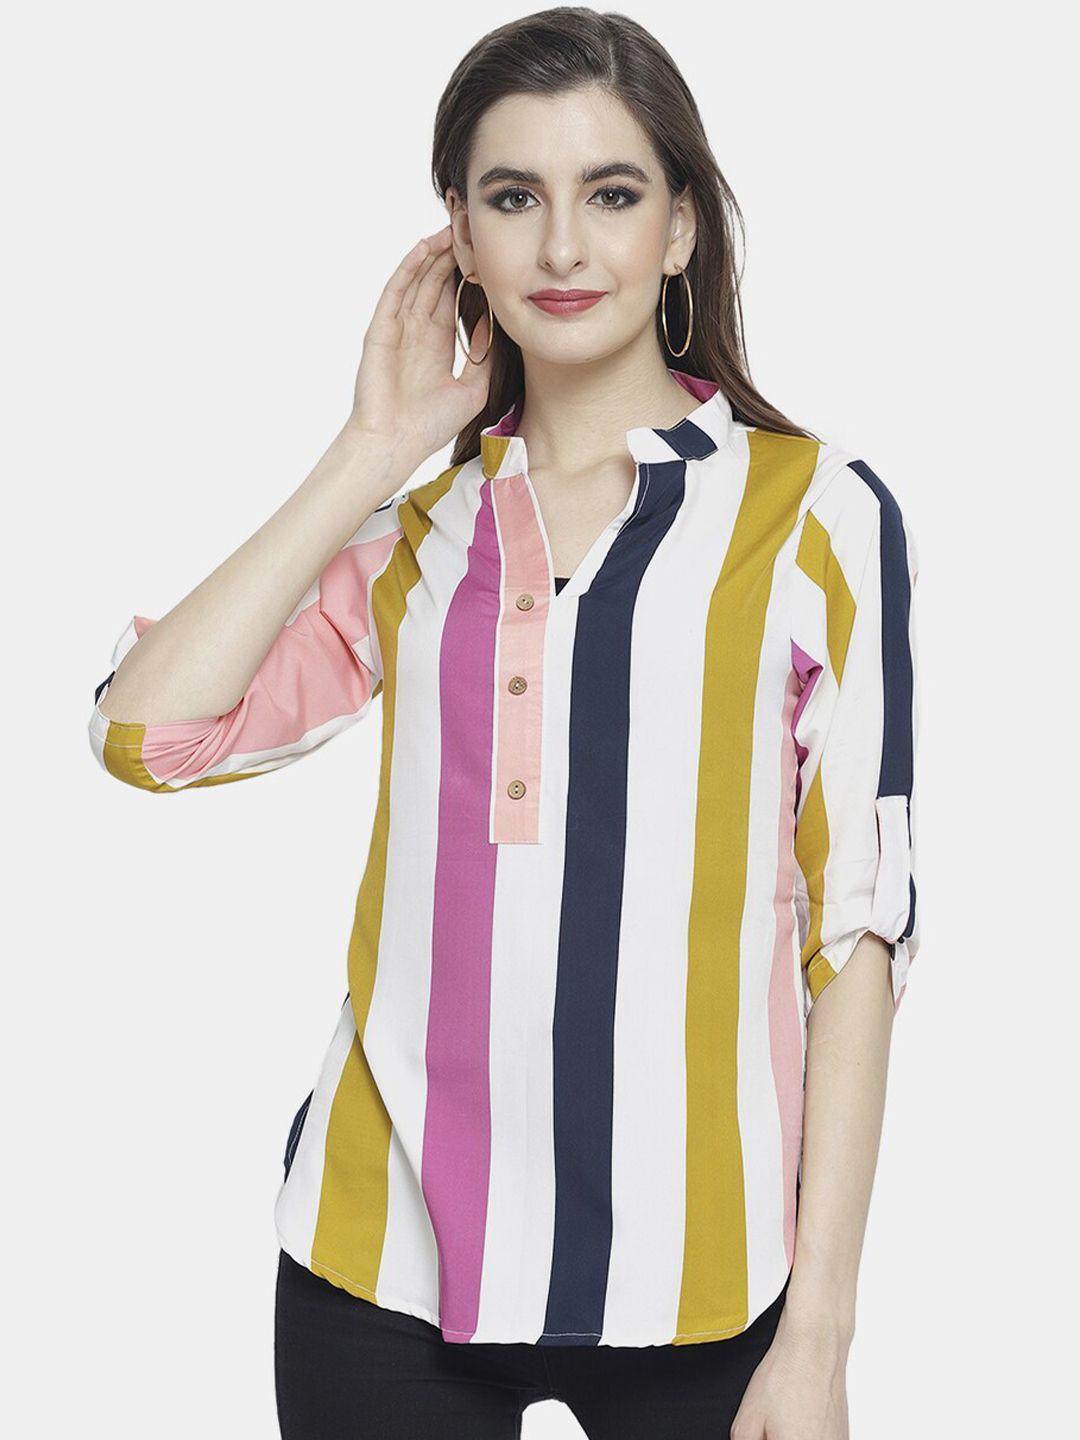 sayesha multicoloured vertical striped roll-up sleeves shirt style top